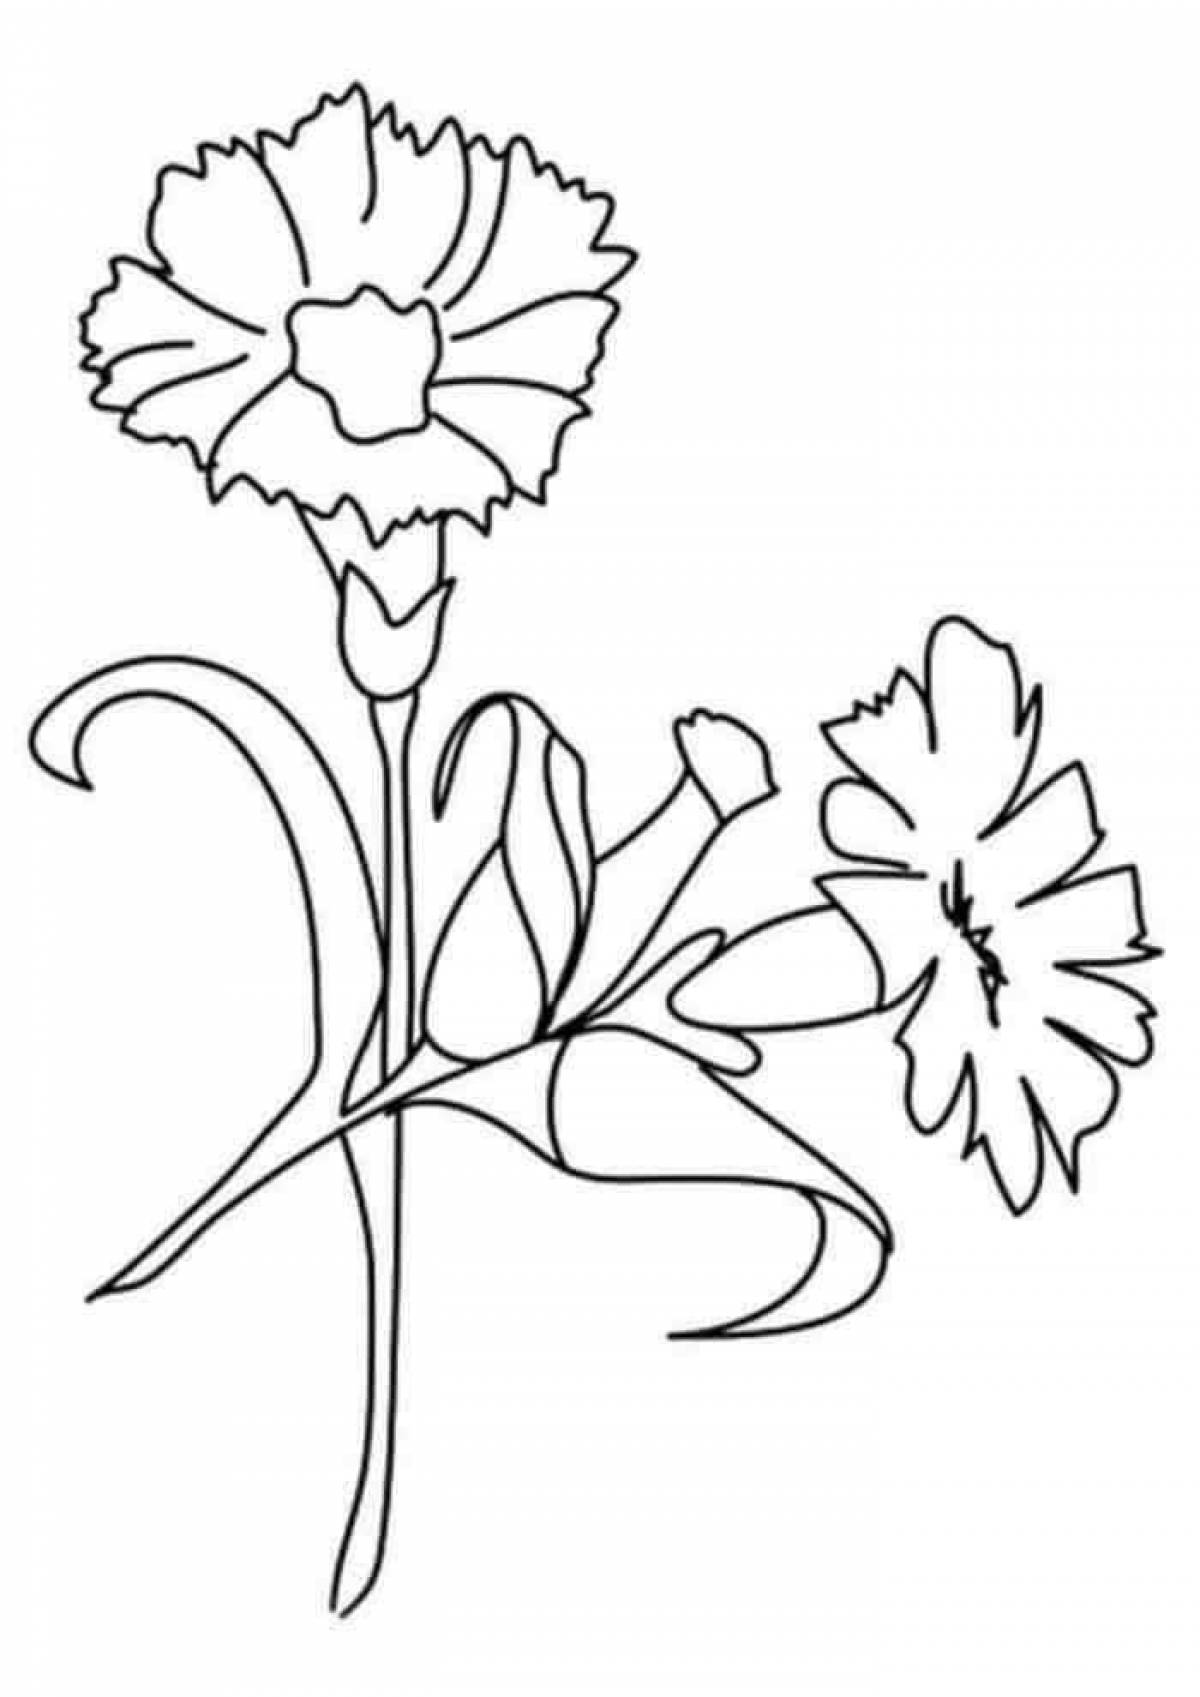 Playful carnation coloring for babies